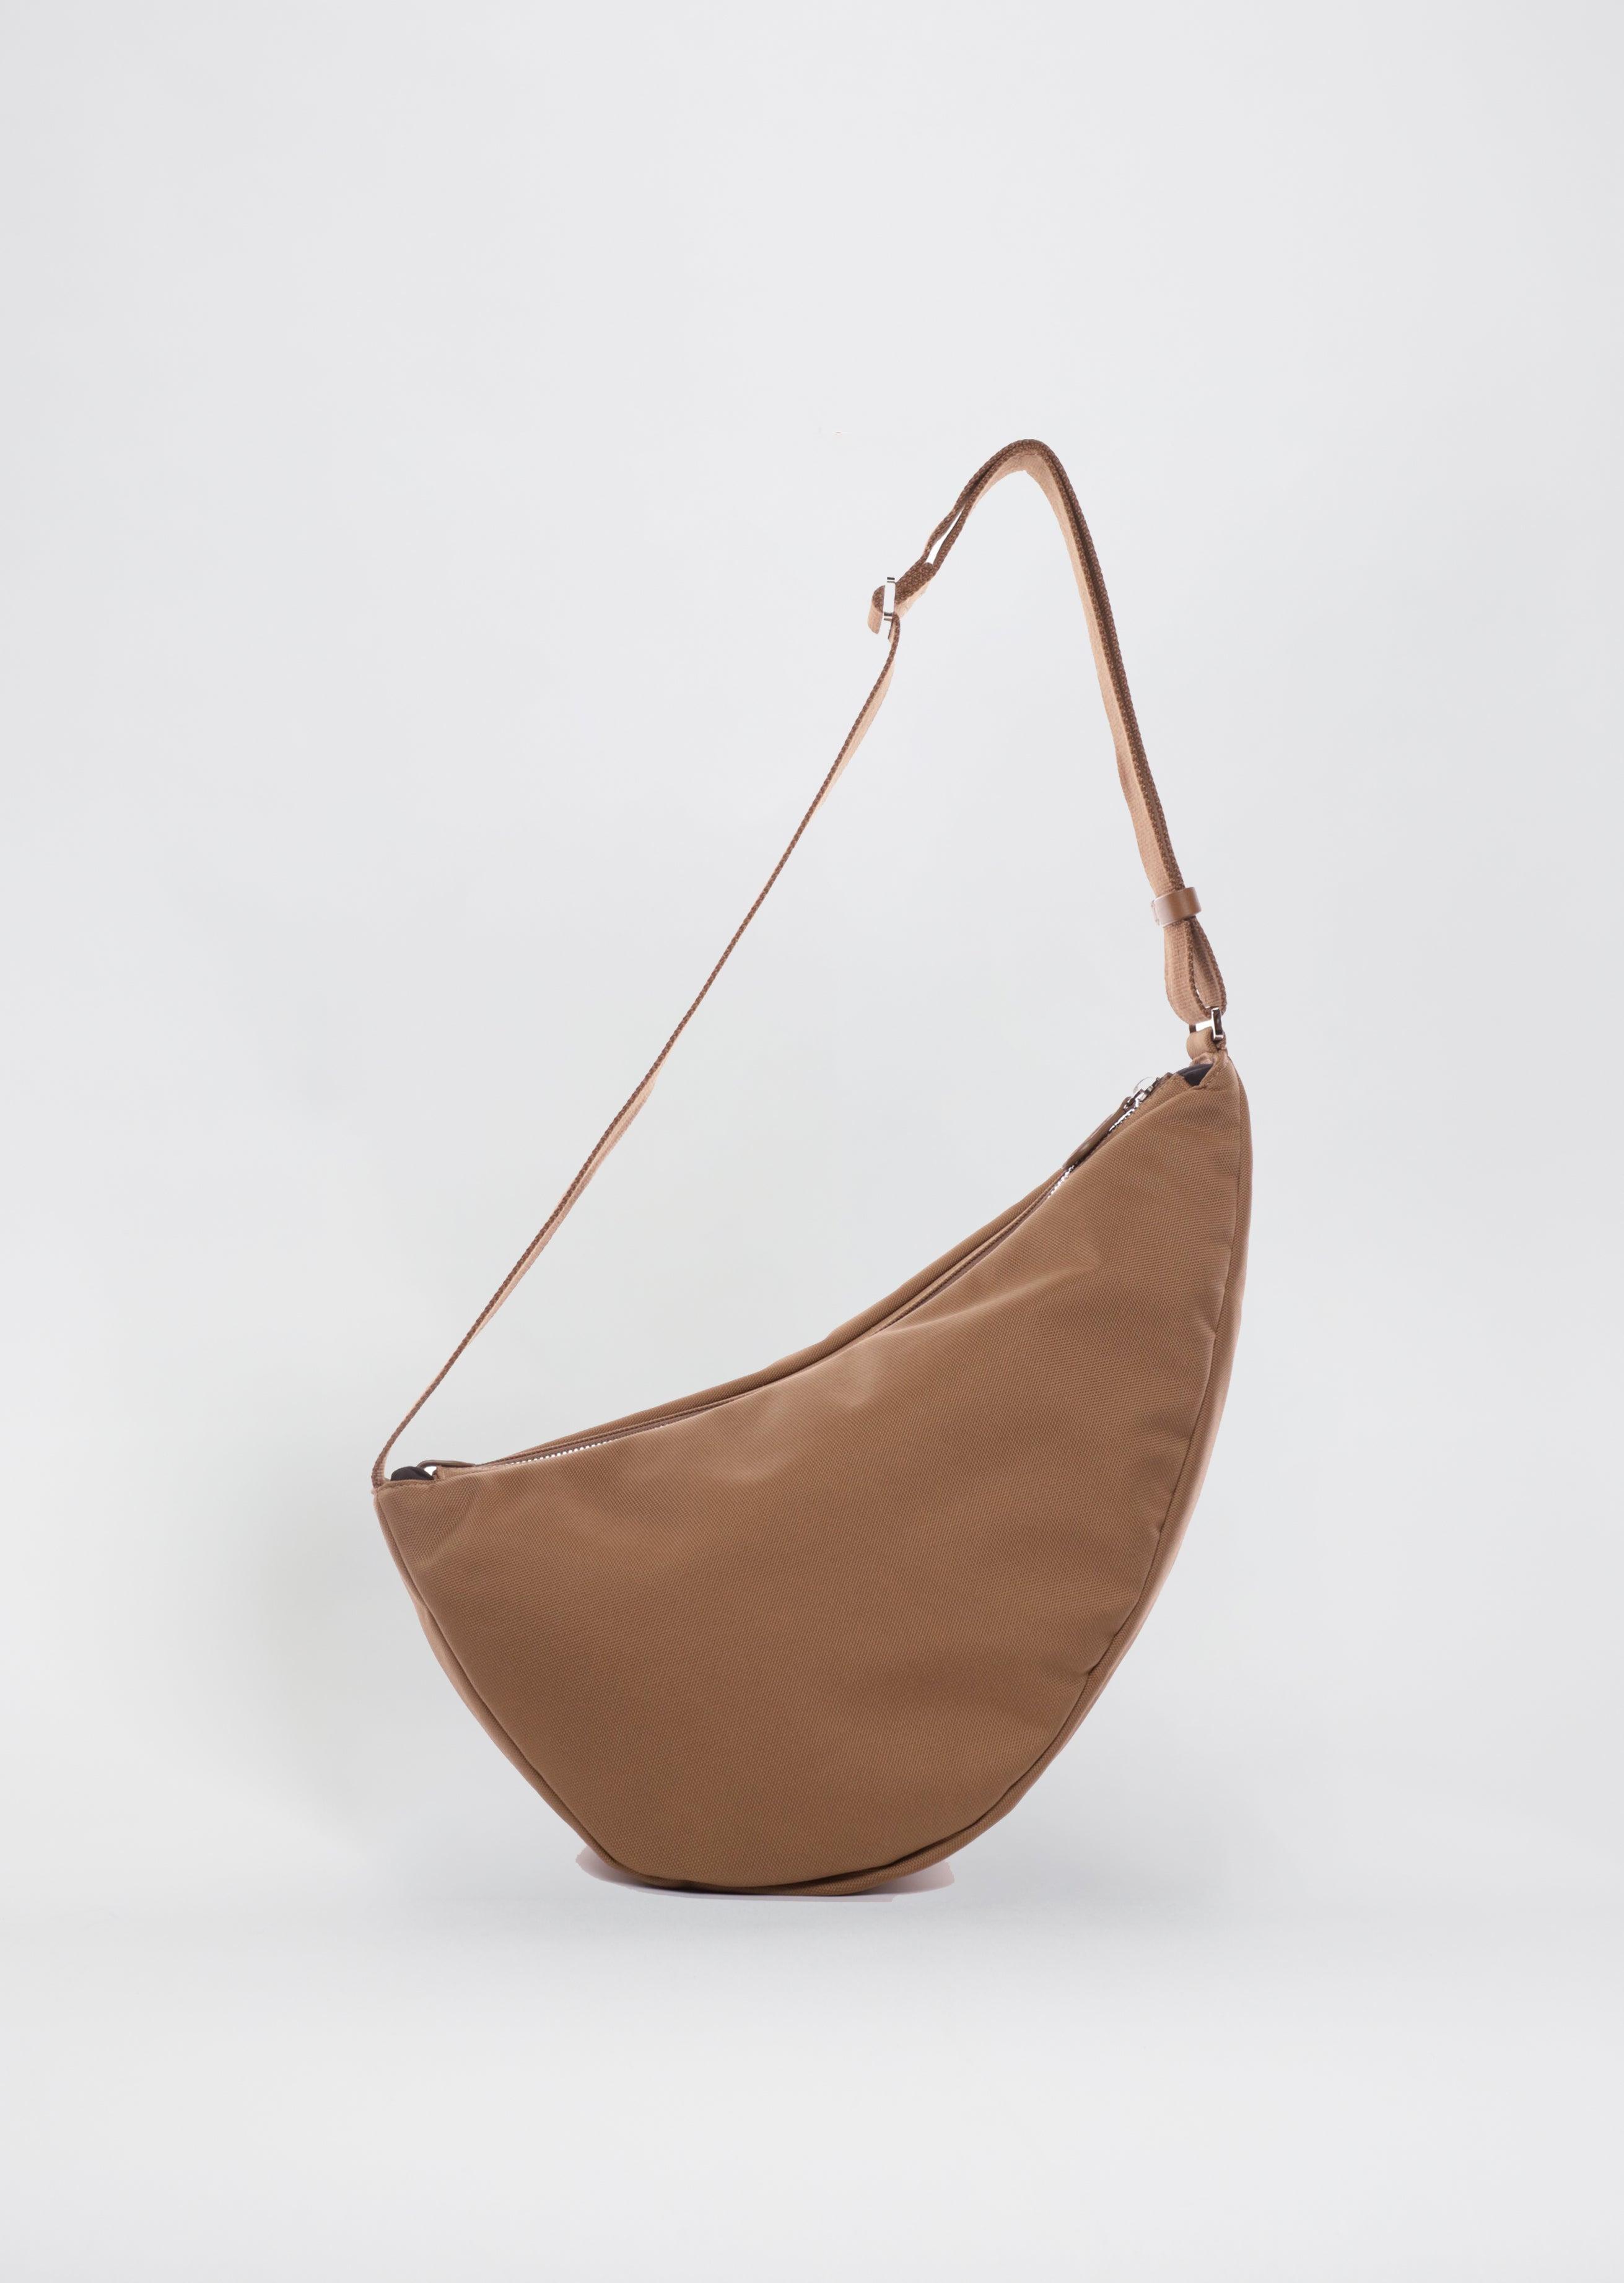 The Row Synthetic Slouchy Banana Two Bag | Lyst